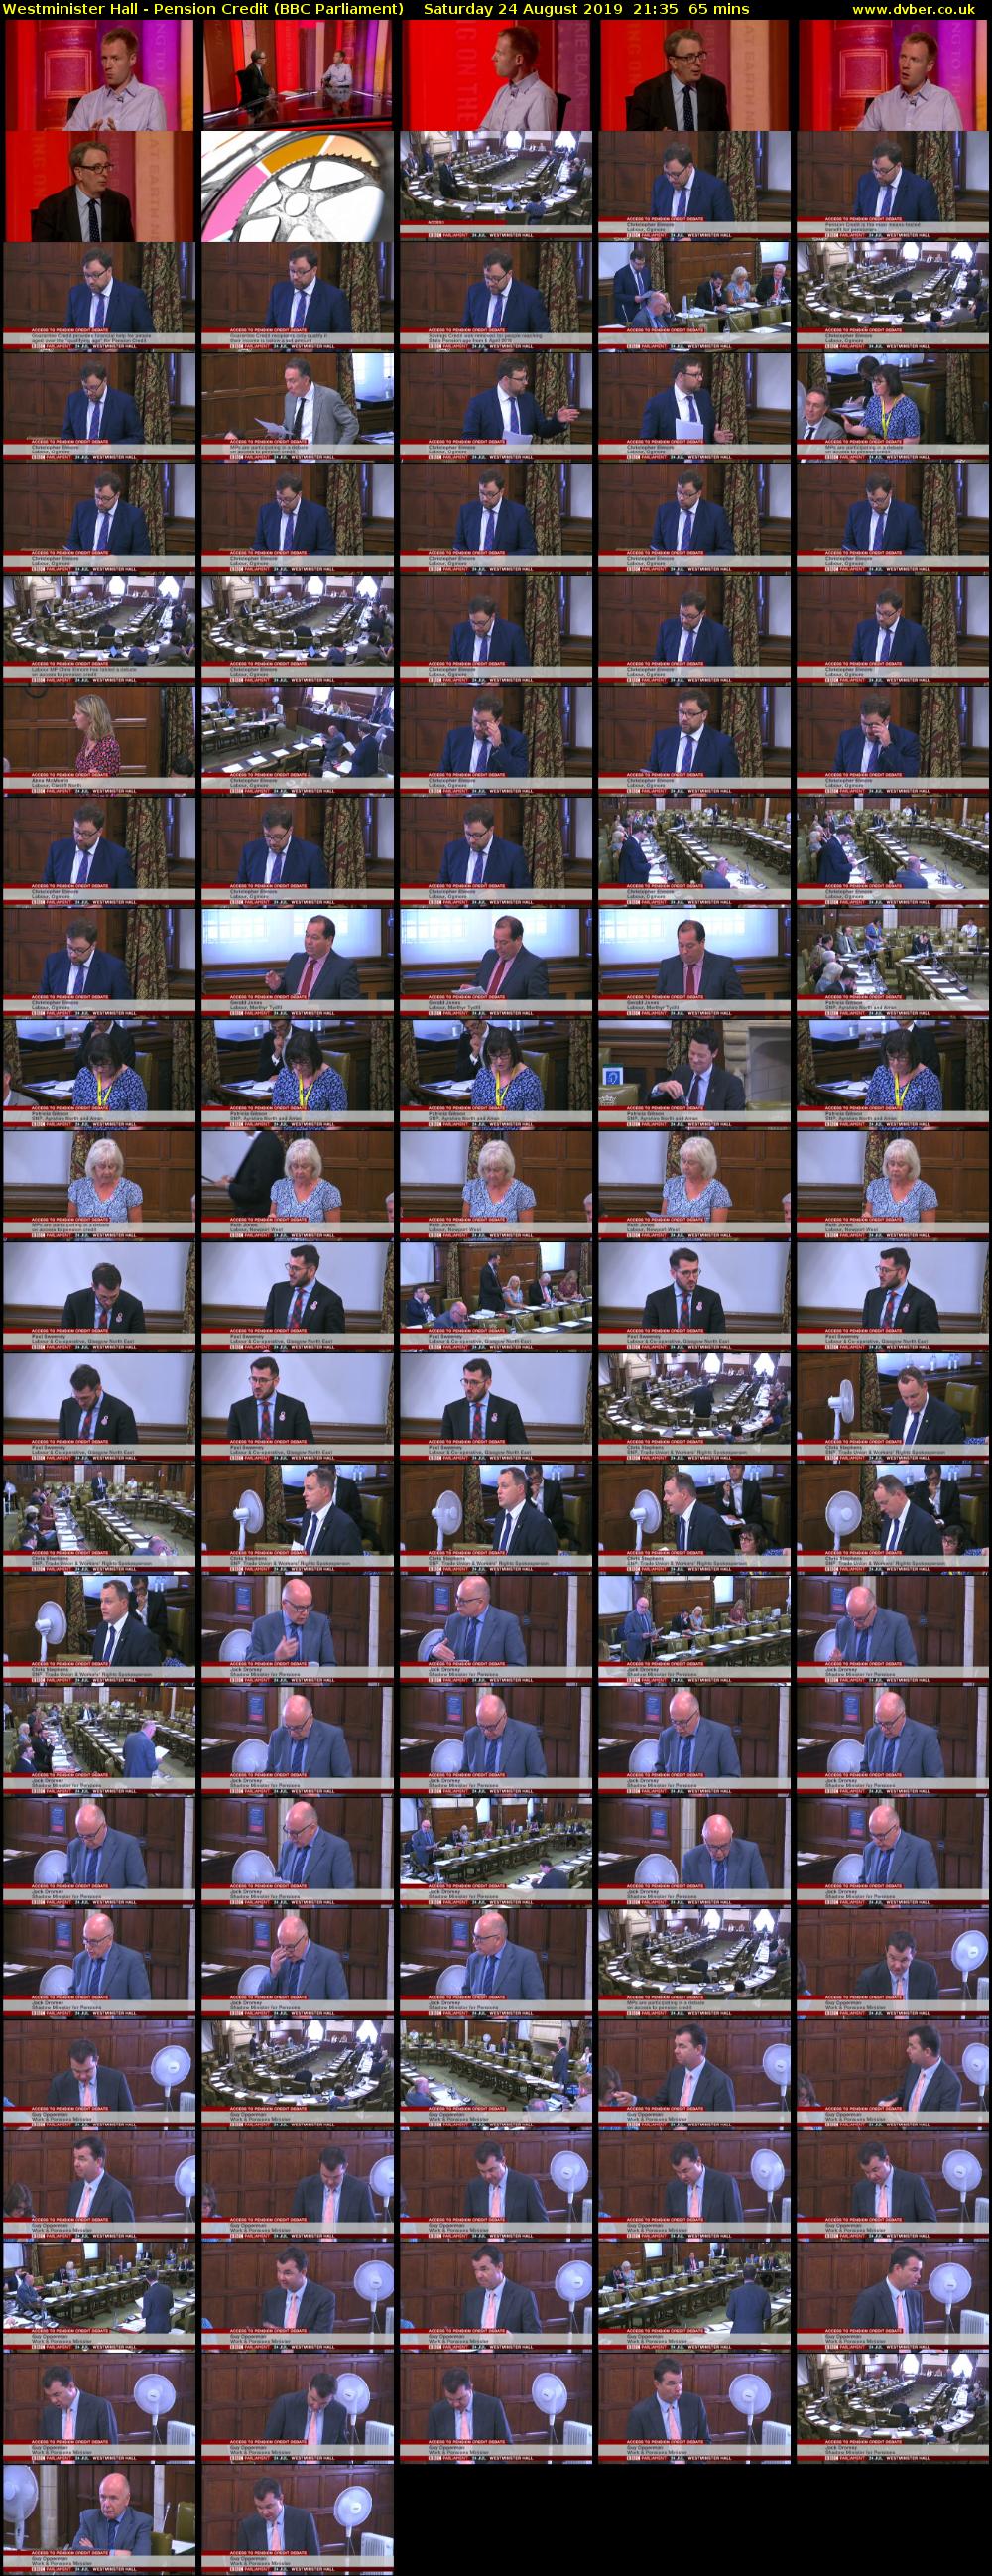 Westminister Hall - Pension Credit (BBC Parliament) Saturday 24 August 2019 21:35 - 22:40